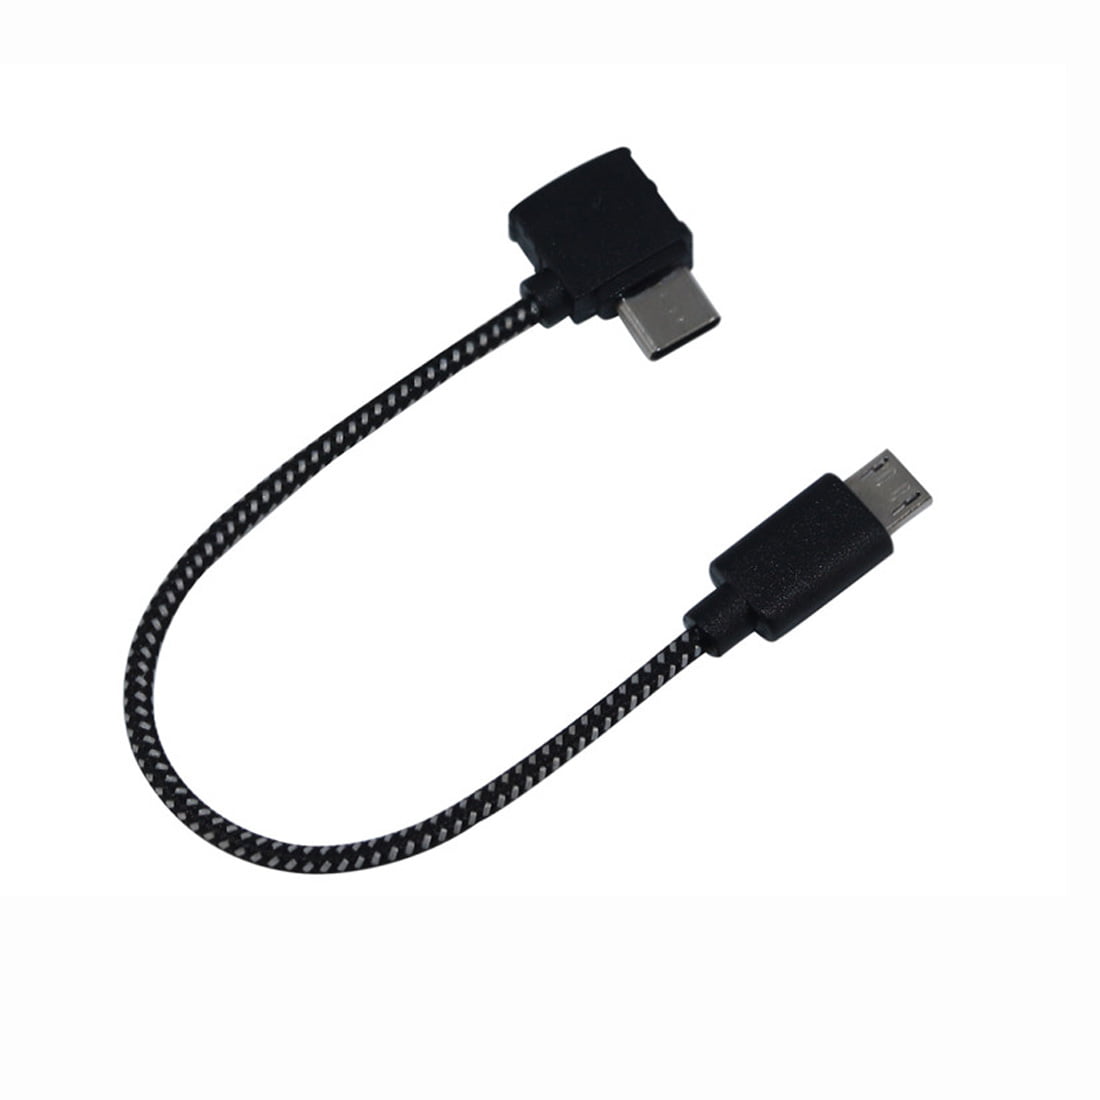 Nylon USB data cable for DJI mavic pro transmitter connects to Phone and tablet 